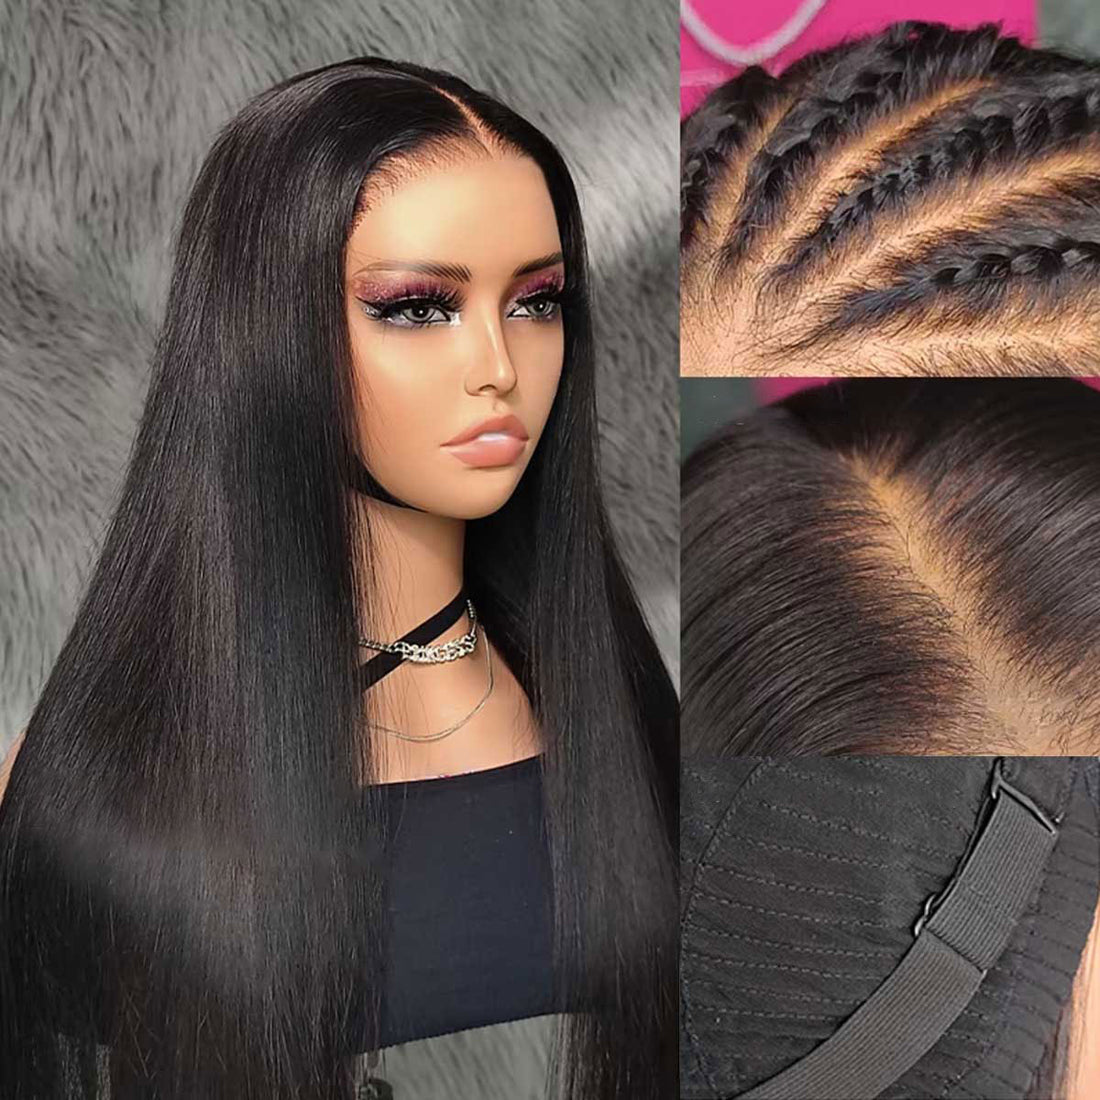 HD Lace 15A Double Drawn Mink Hair 4x4/5x5 Lace Frontal Straight Human Hair Wigs 210% Density